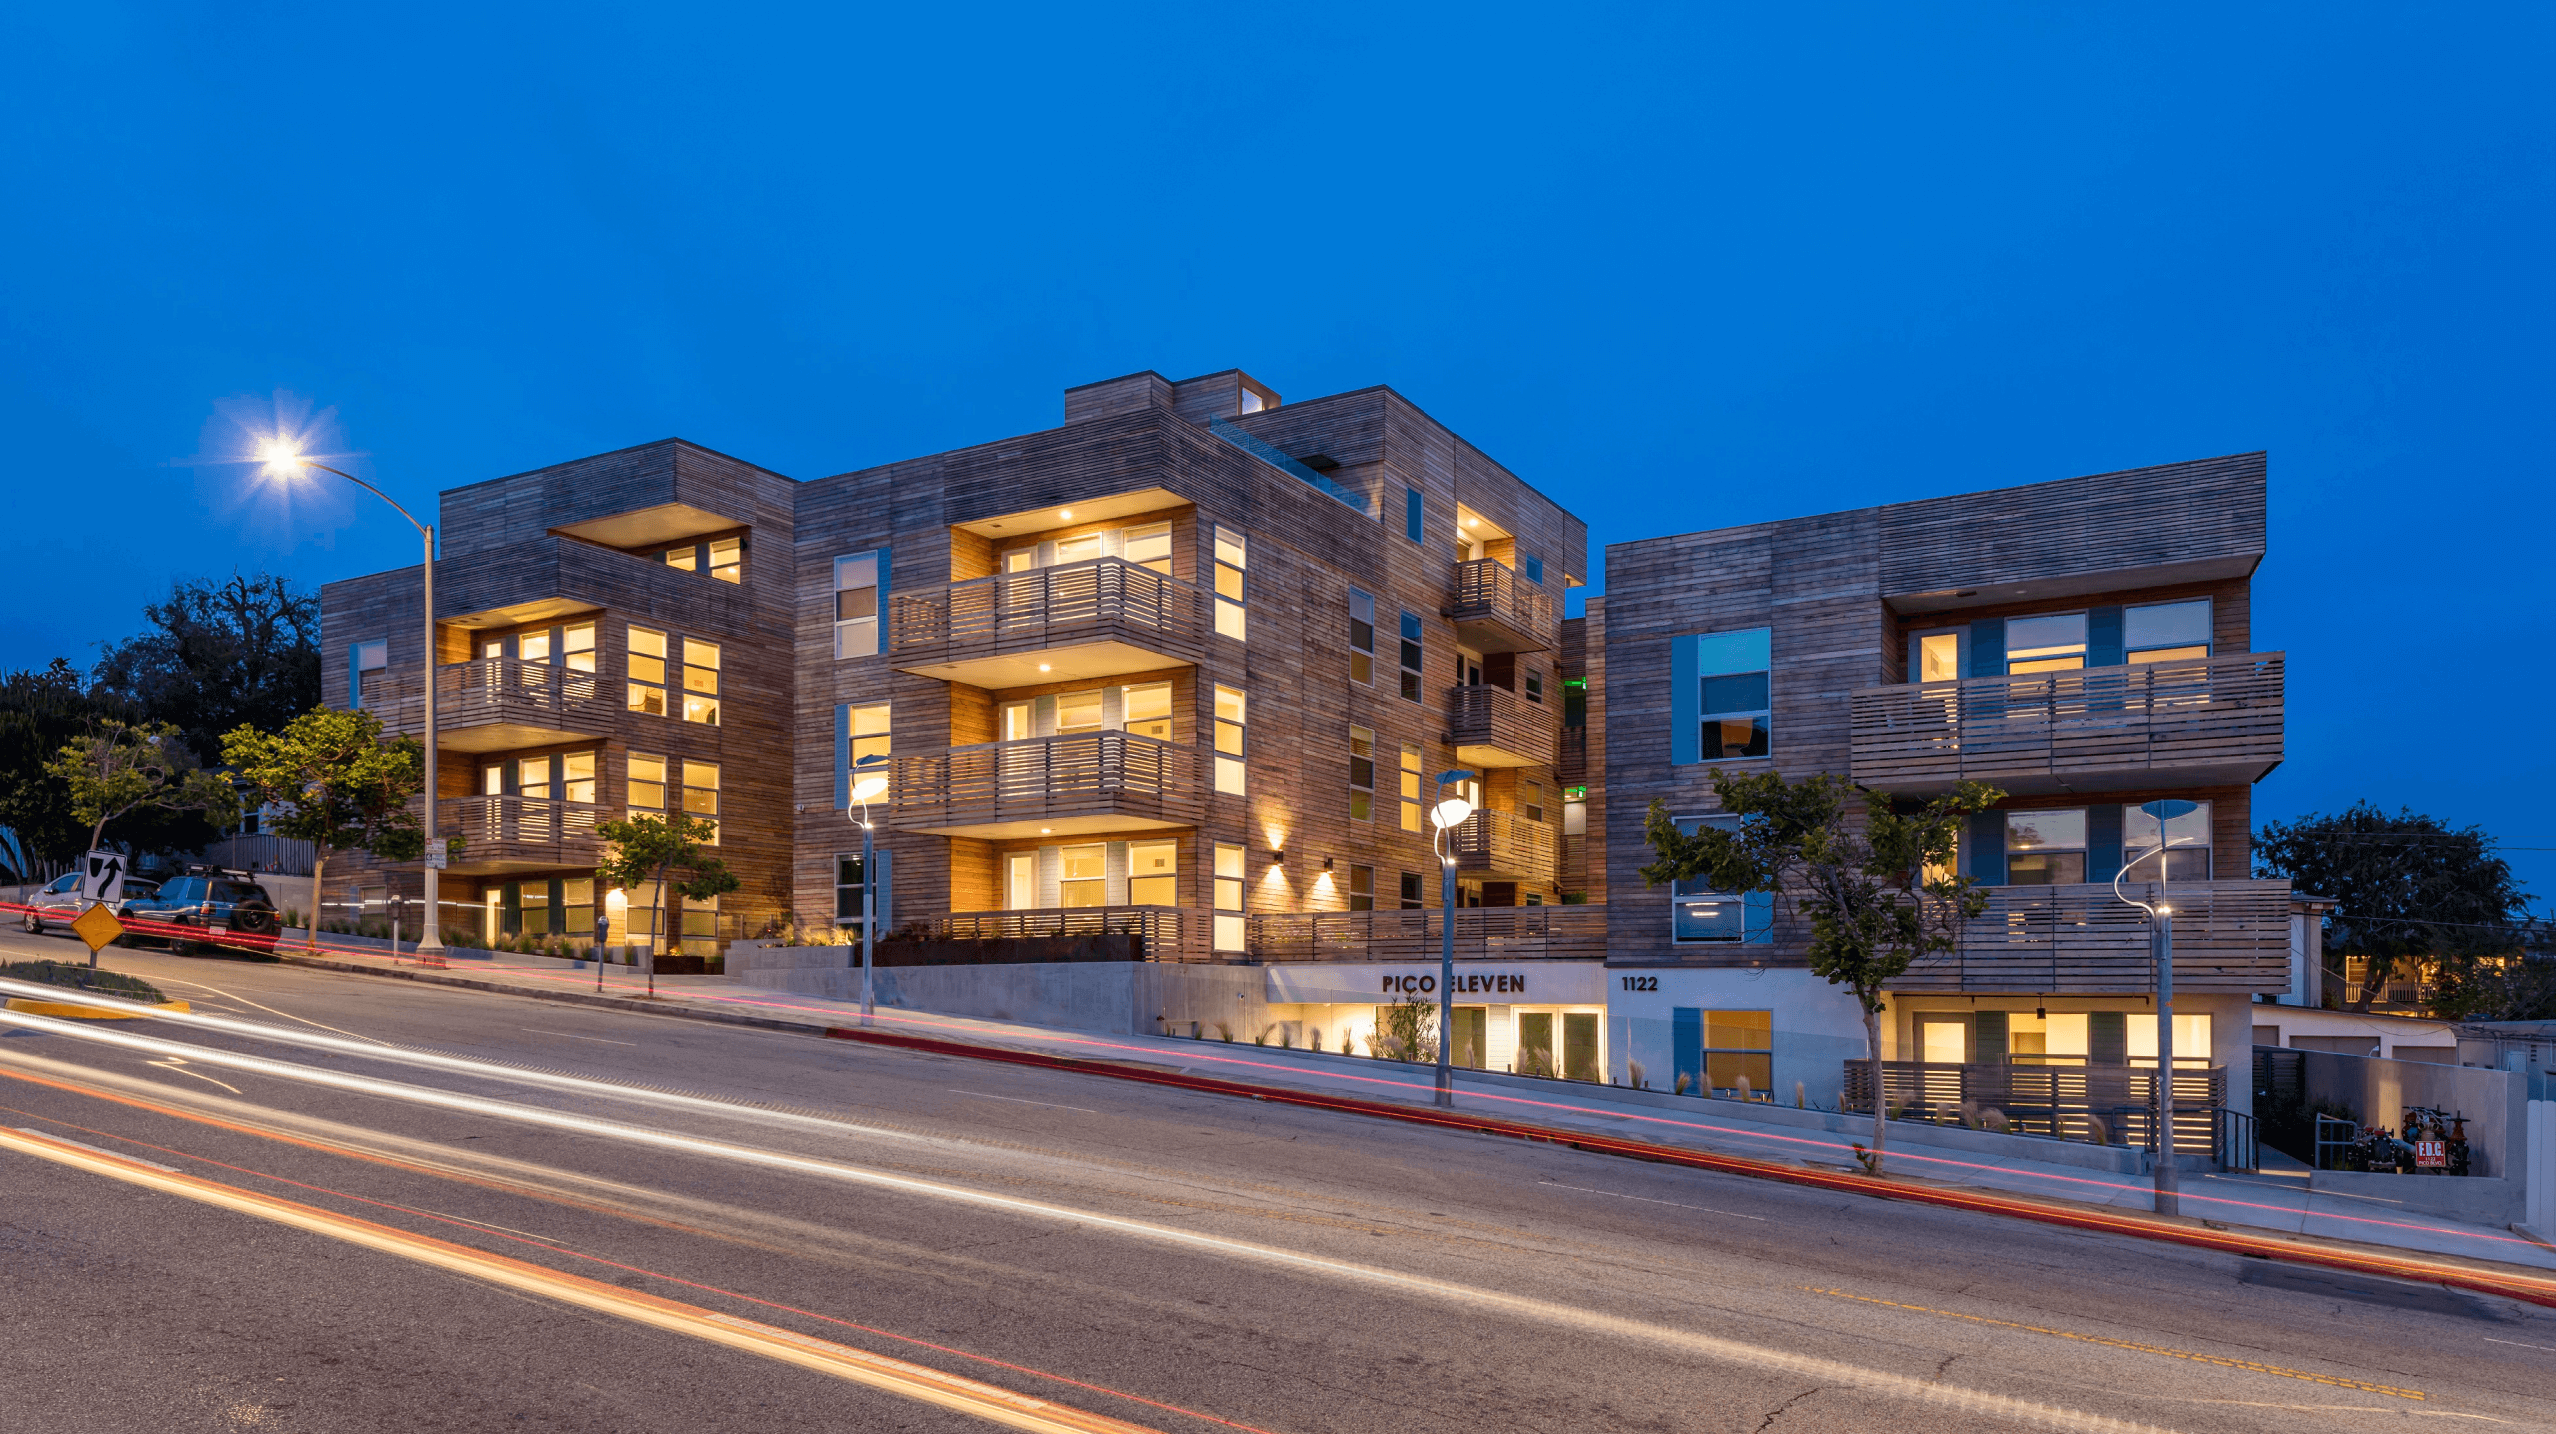 A modern multi-family housing structure named Pico Eleven.